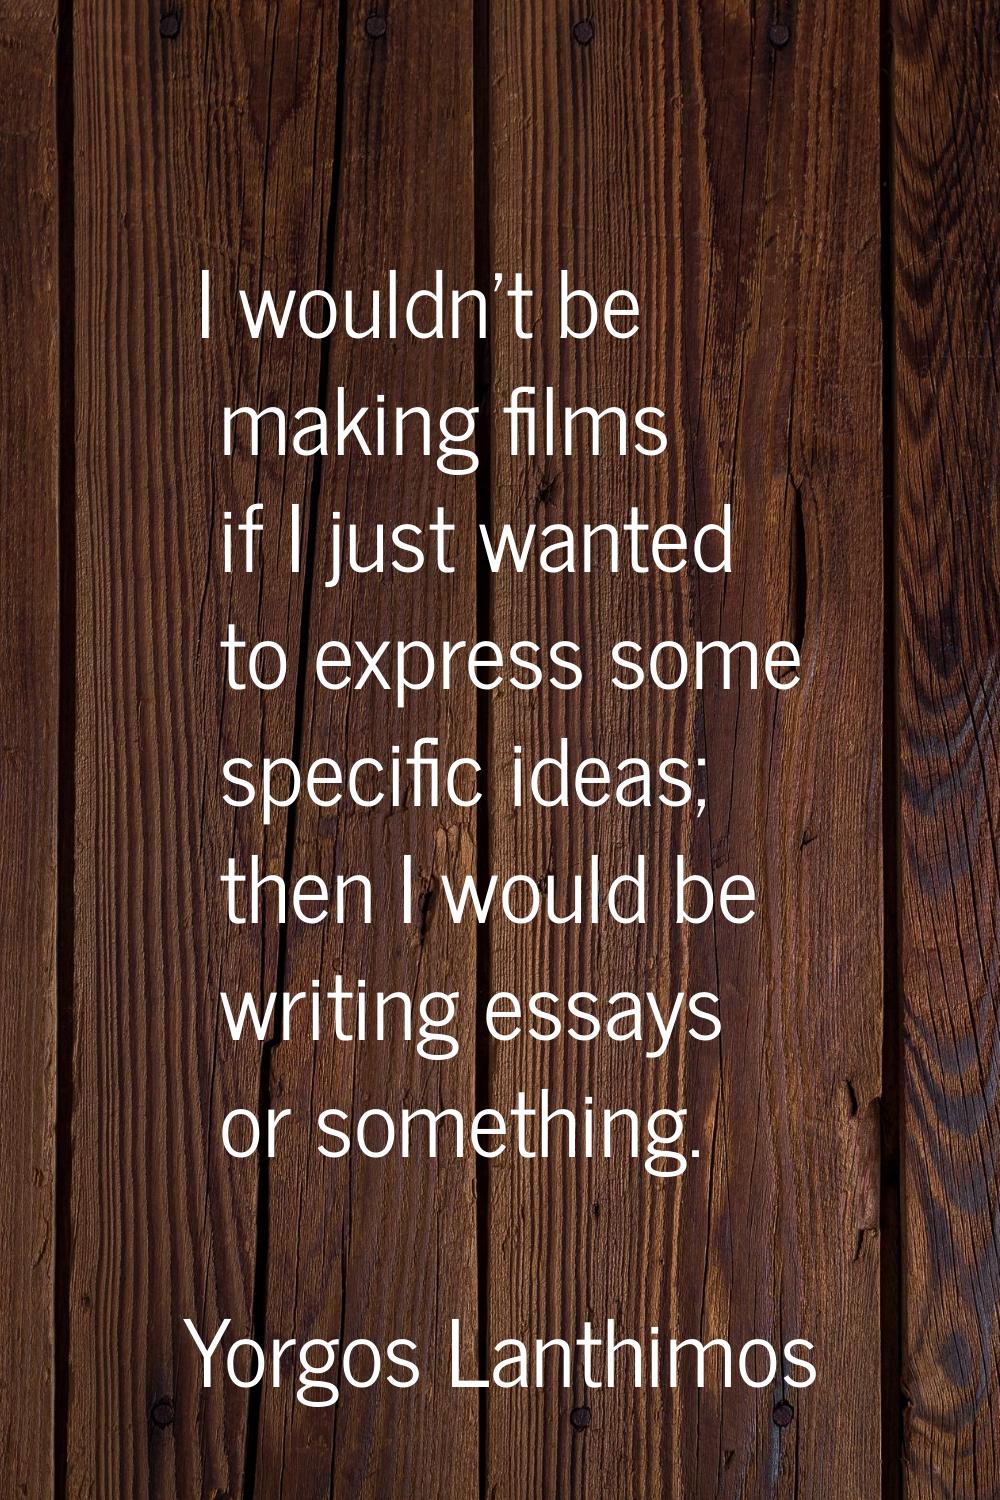 I wouldn't be making films if I just wanted to express some specific ideas; then I would be writing